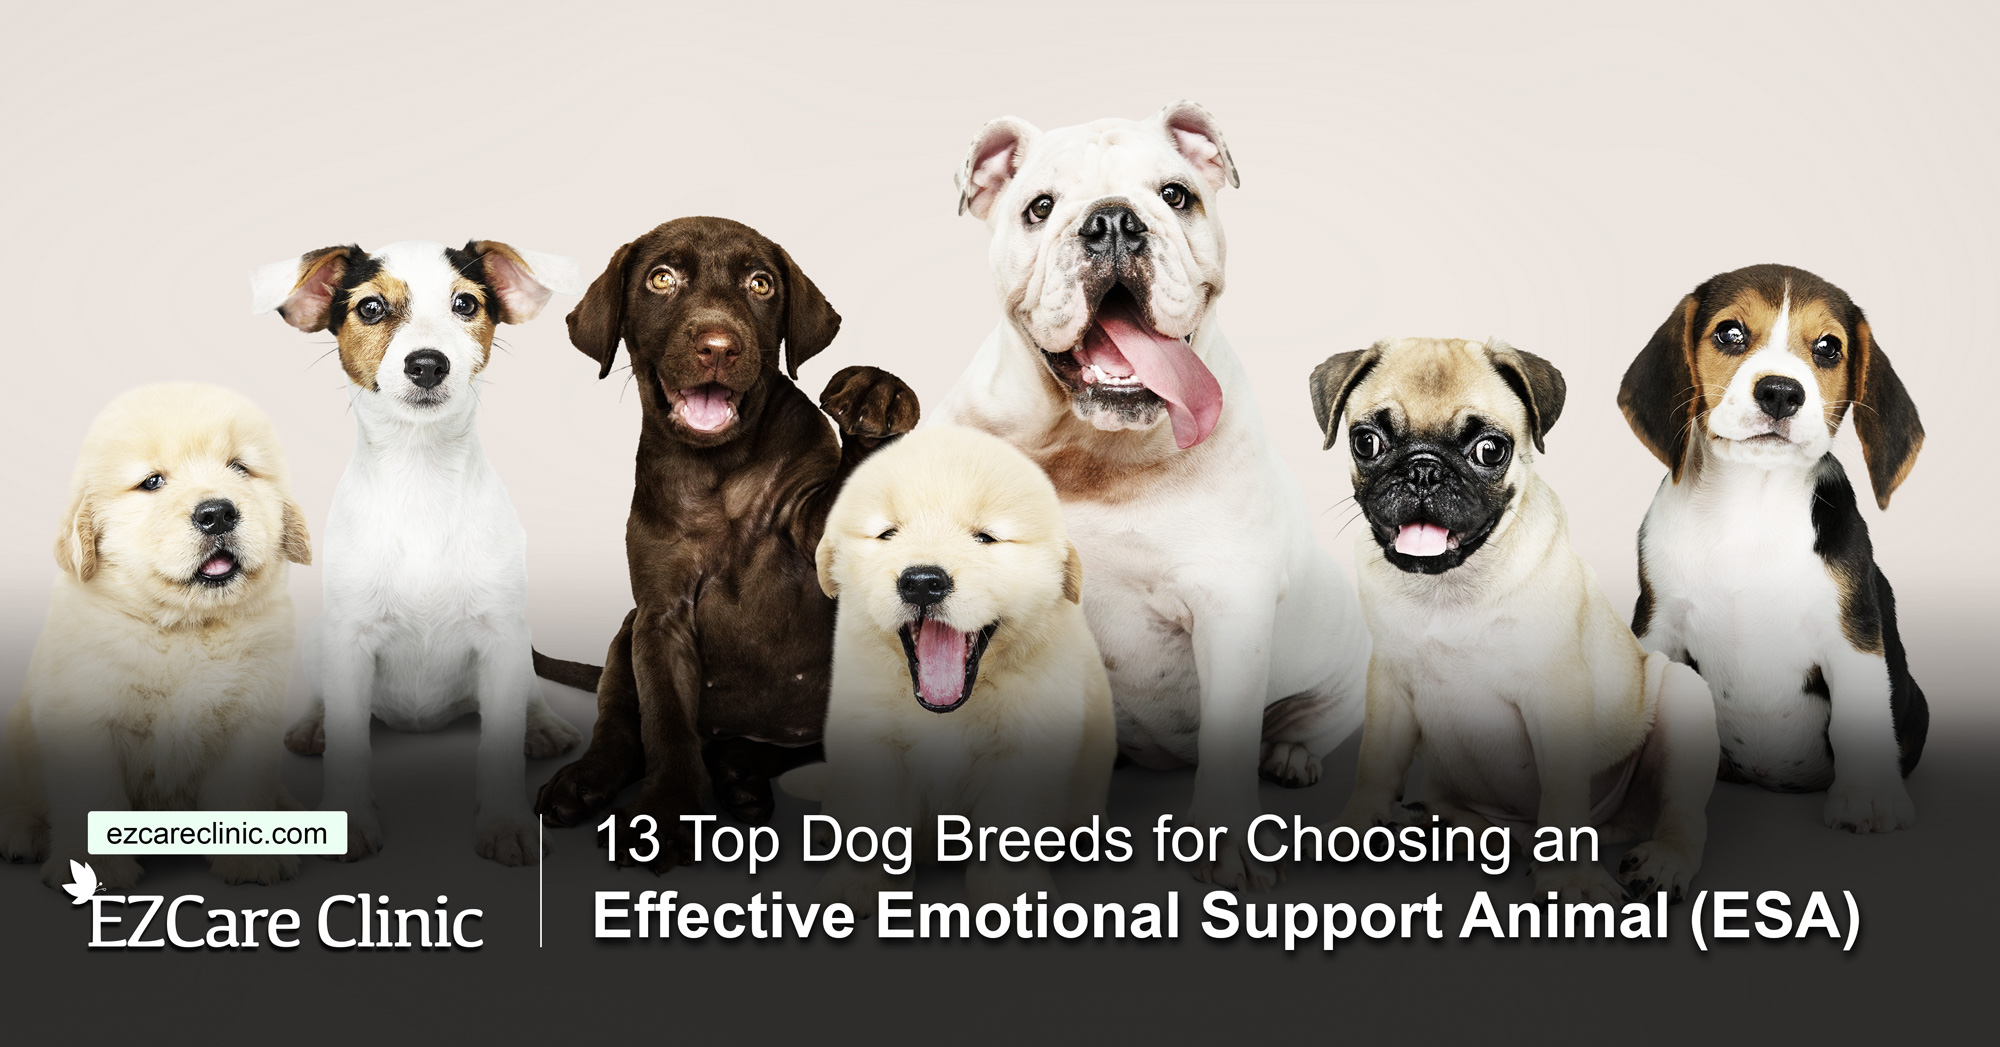 13 Top Dog Breeds for an Effective ESA - EZCare Clinic